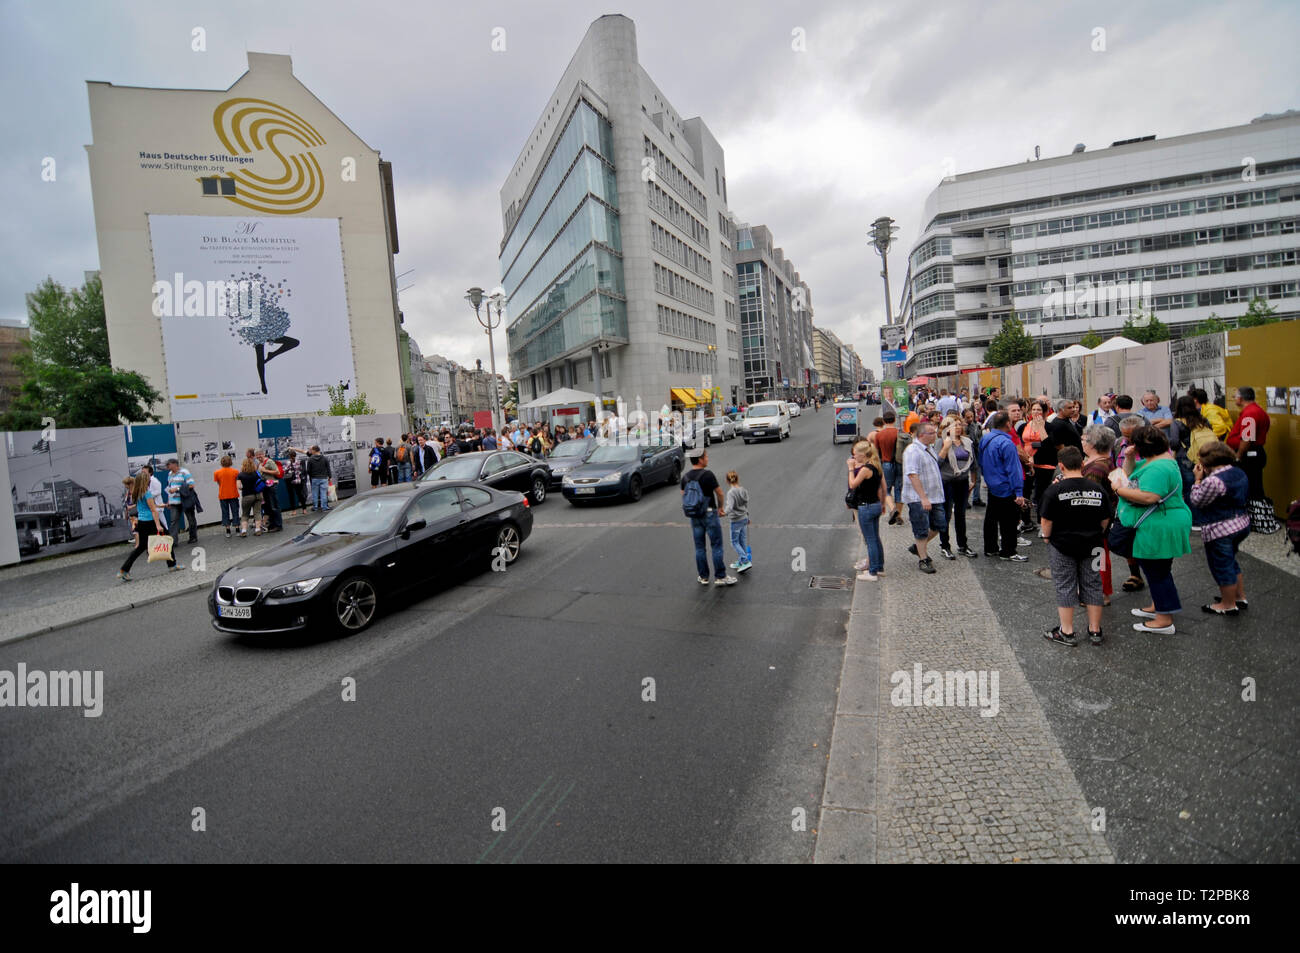 Berlin wall, Checkpoint Charlie, Germany Stock Photo